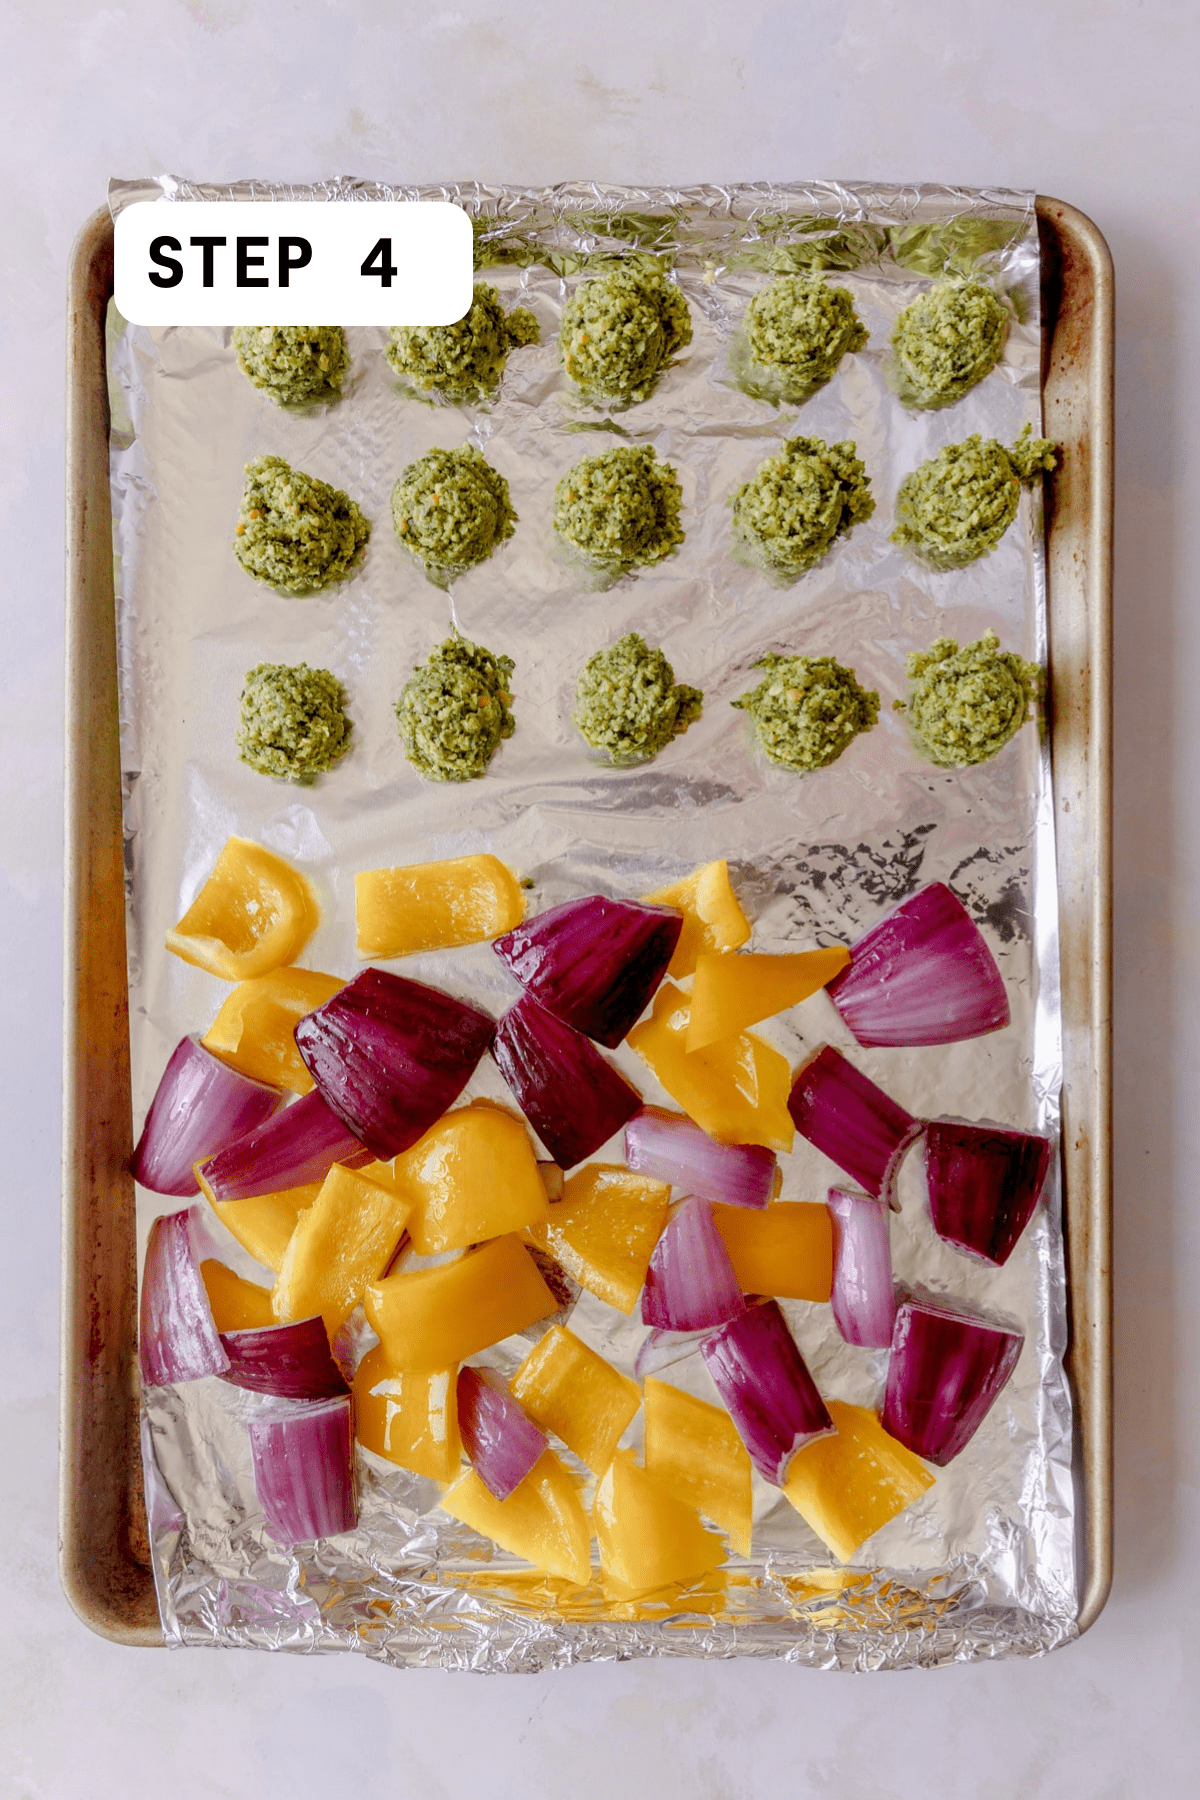 Falafel balls, peppers, and onions on a foil lined baking tray.  